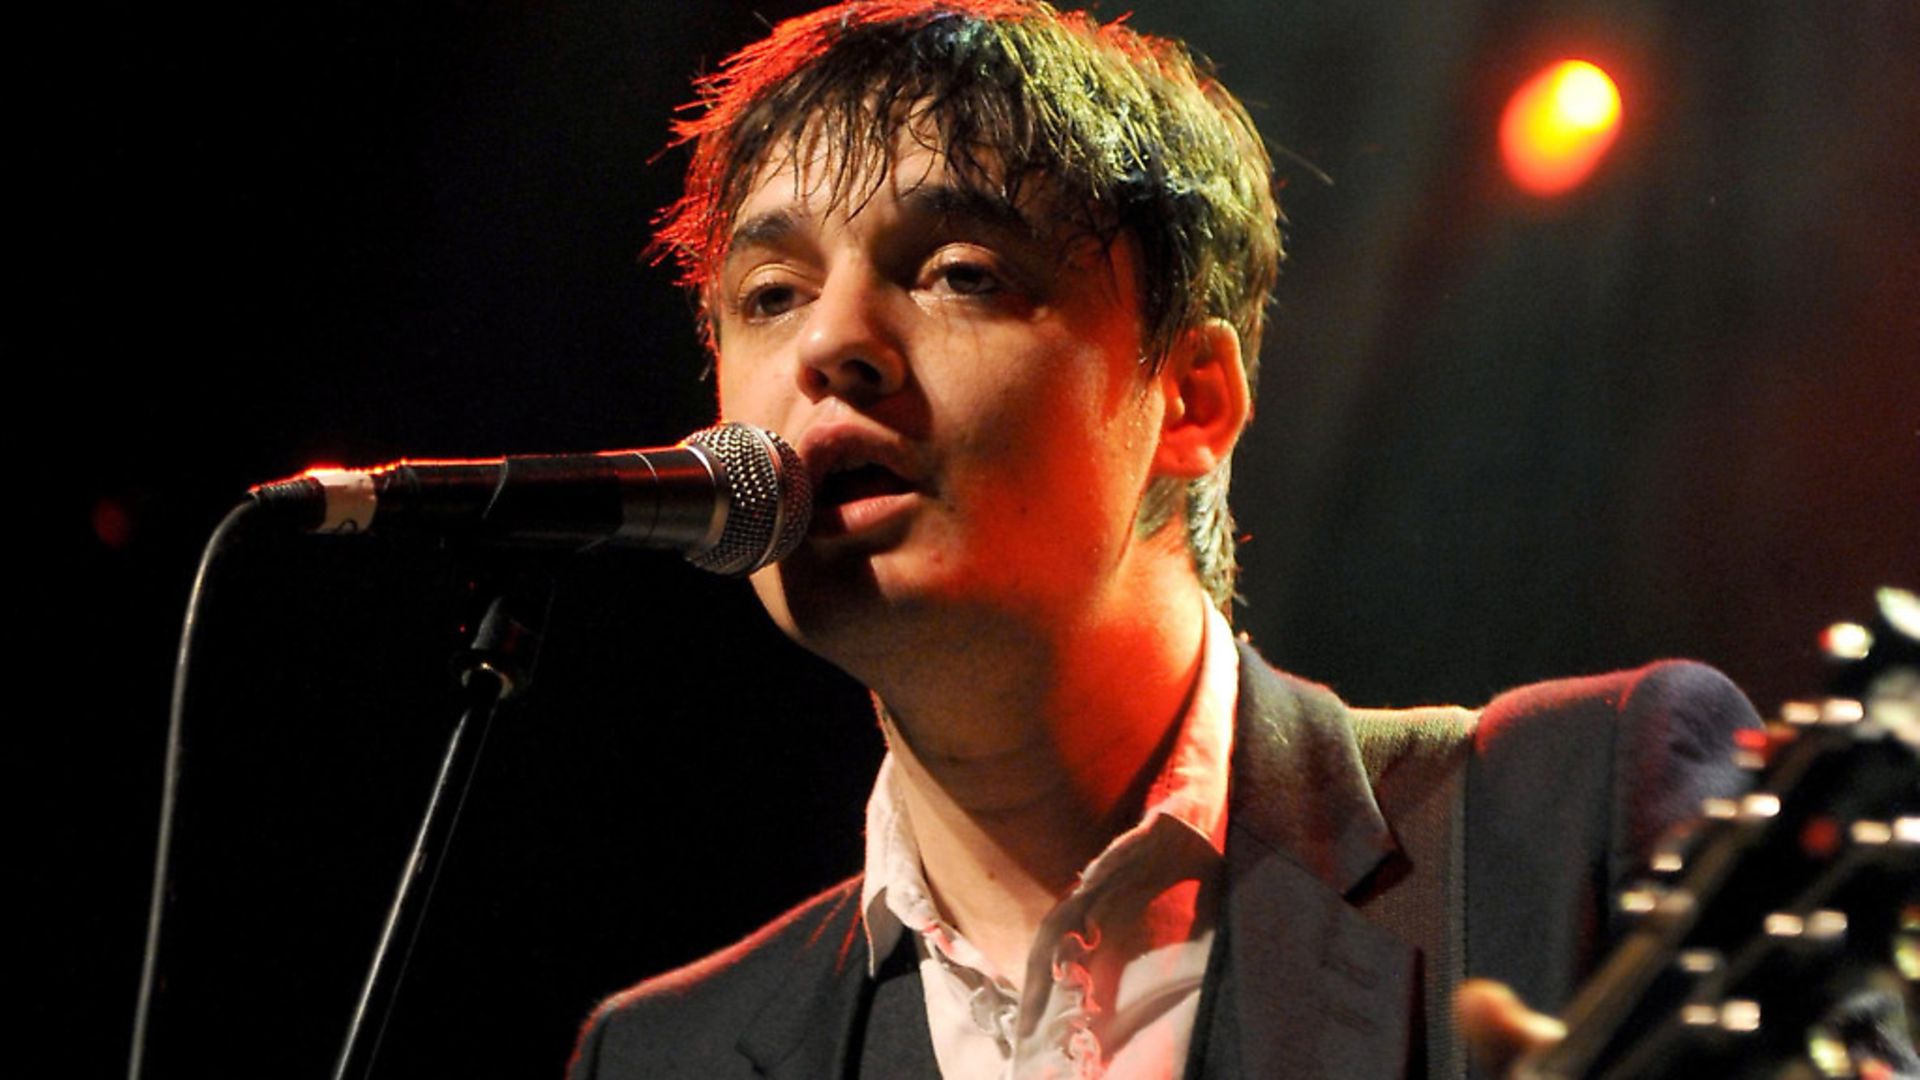 Pete Doherty, seen here at O2 Shepherd's Bush Empire, told a Manchester audience "don't let it be the Tories" before the general election. Picture: Anthony Devlin/PA Archive/PA Images - Credit: PA Archive/PA Images